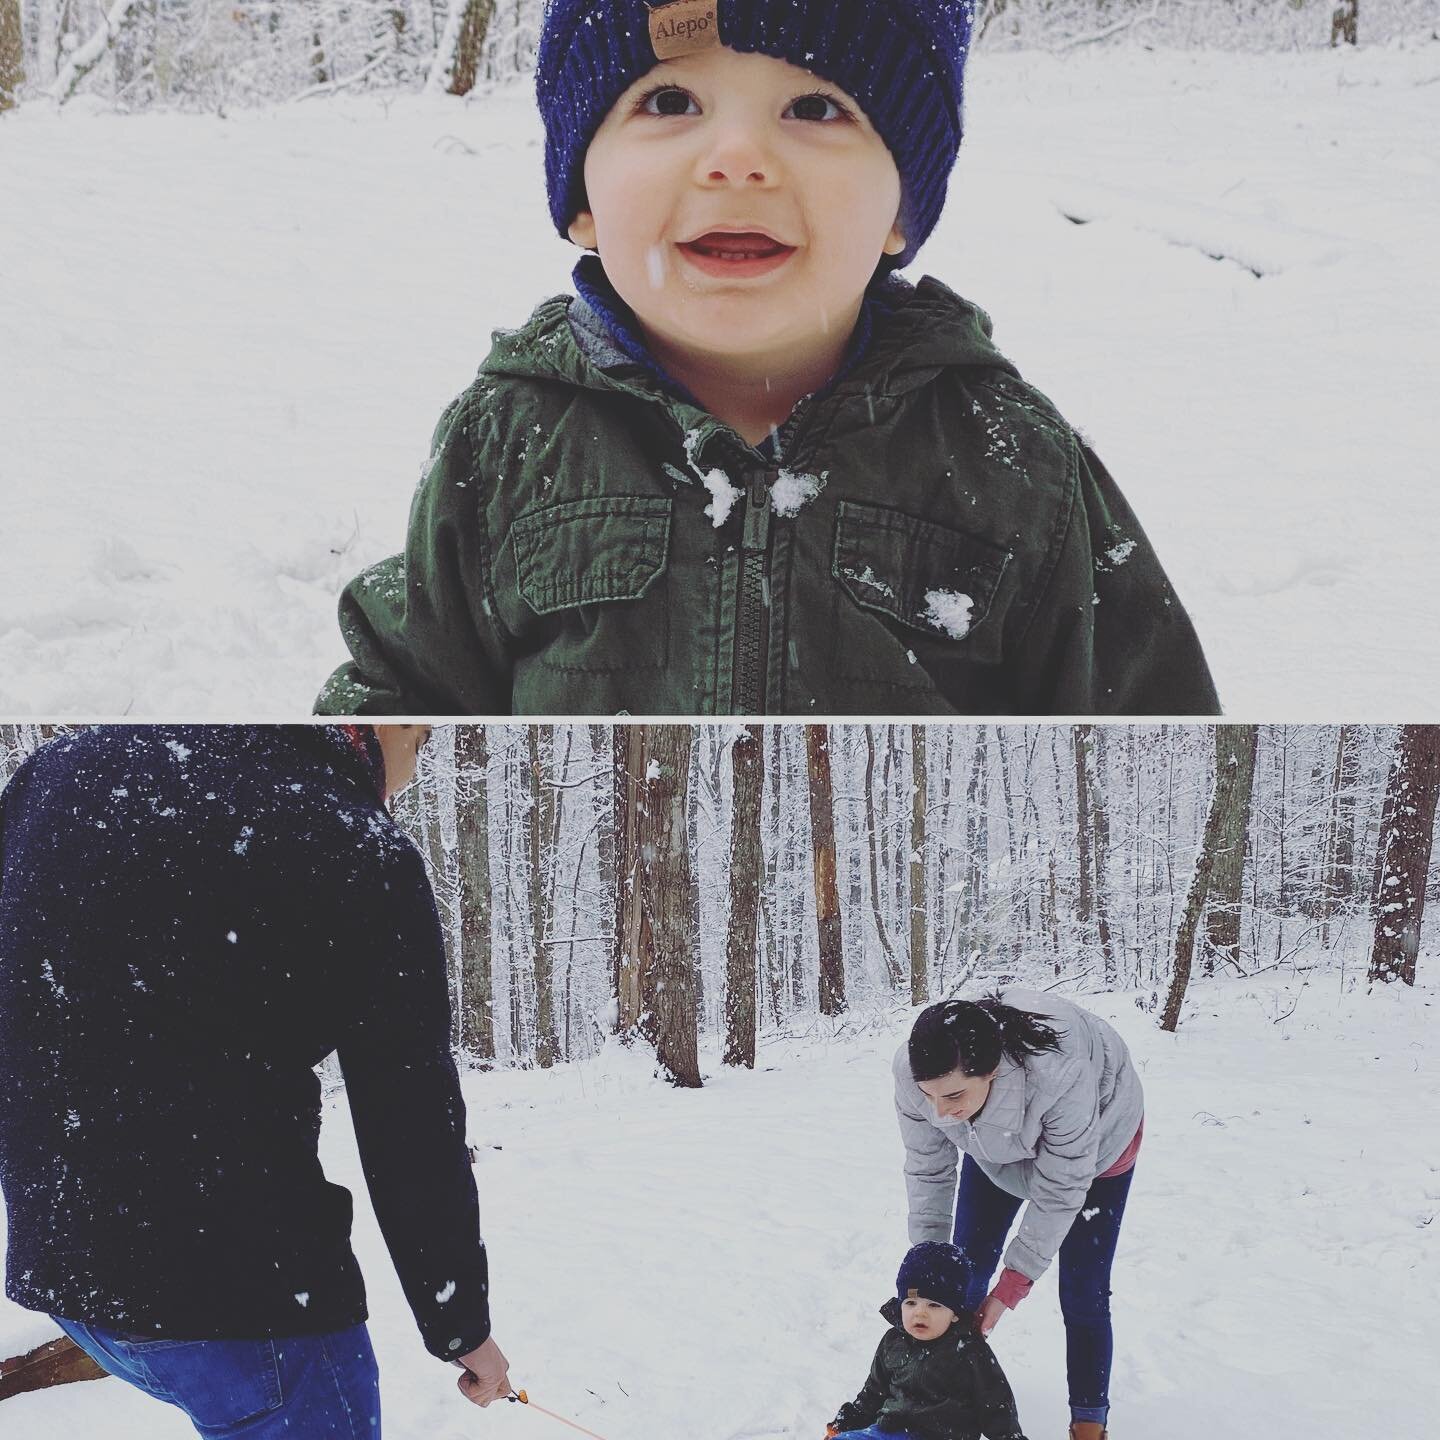 Little man&rsquo;s first snow! He was in awe, but it&rsquo;s safe to say that he wasn&rsquo;t the biggest fan...yet! #AdventuresWithAiden #ThunderThighs #StinkyStud